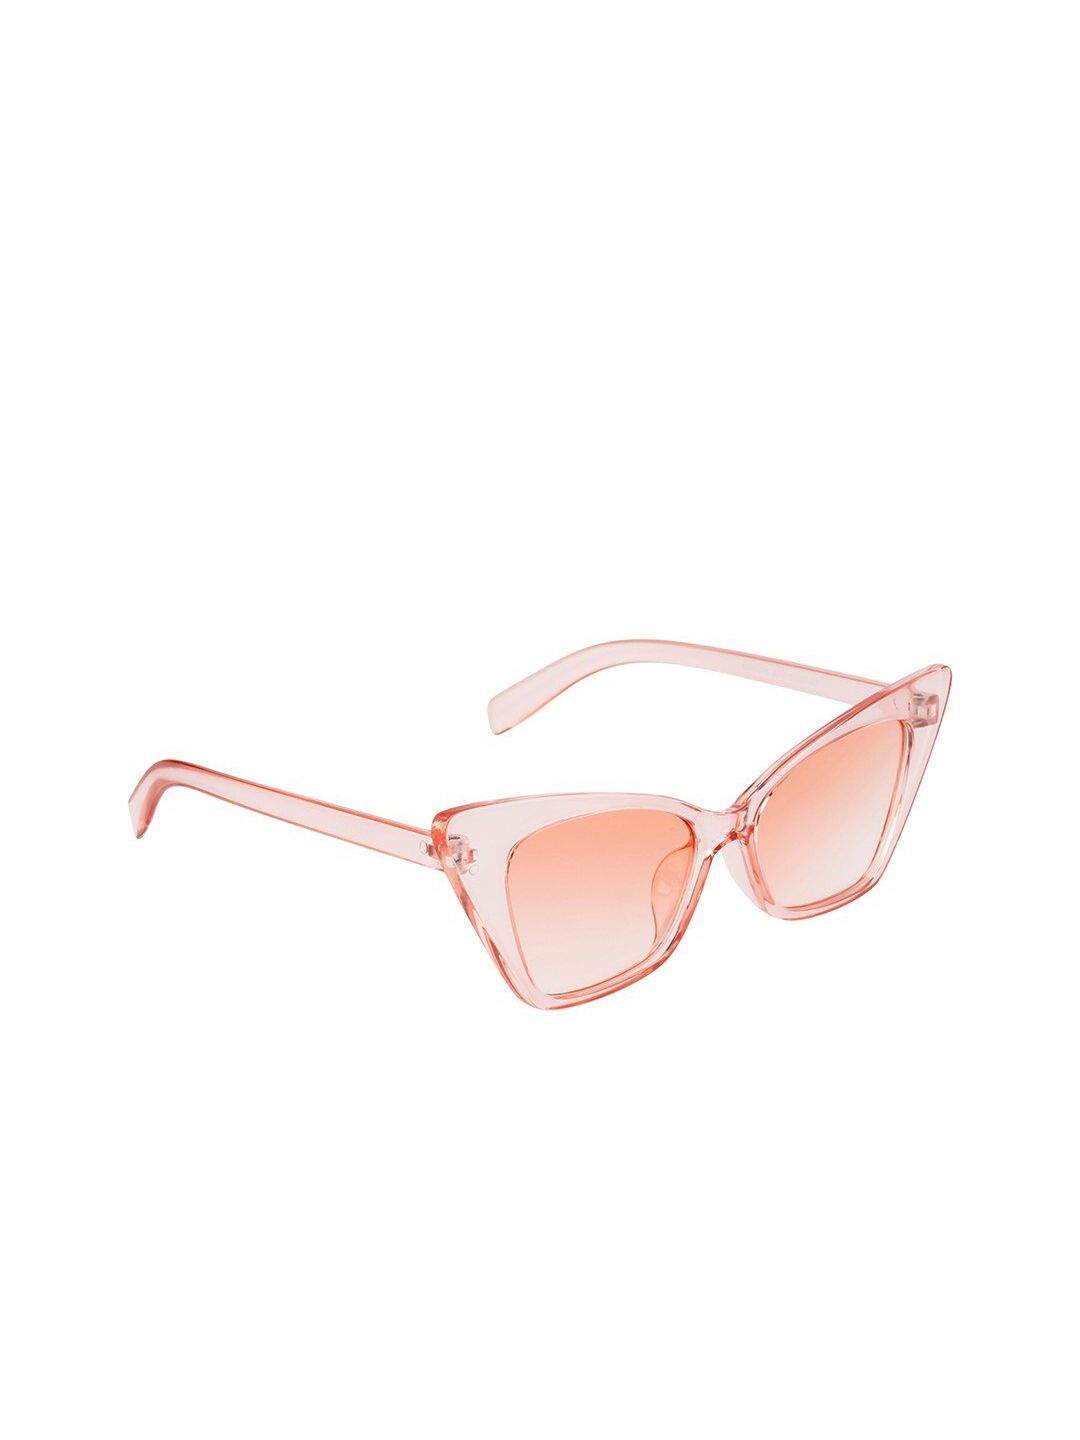 Awestuffs Women Pink Lens & Pink Cat eye Sunglasses with UV Protected Lens Price in India